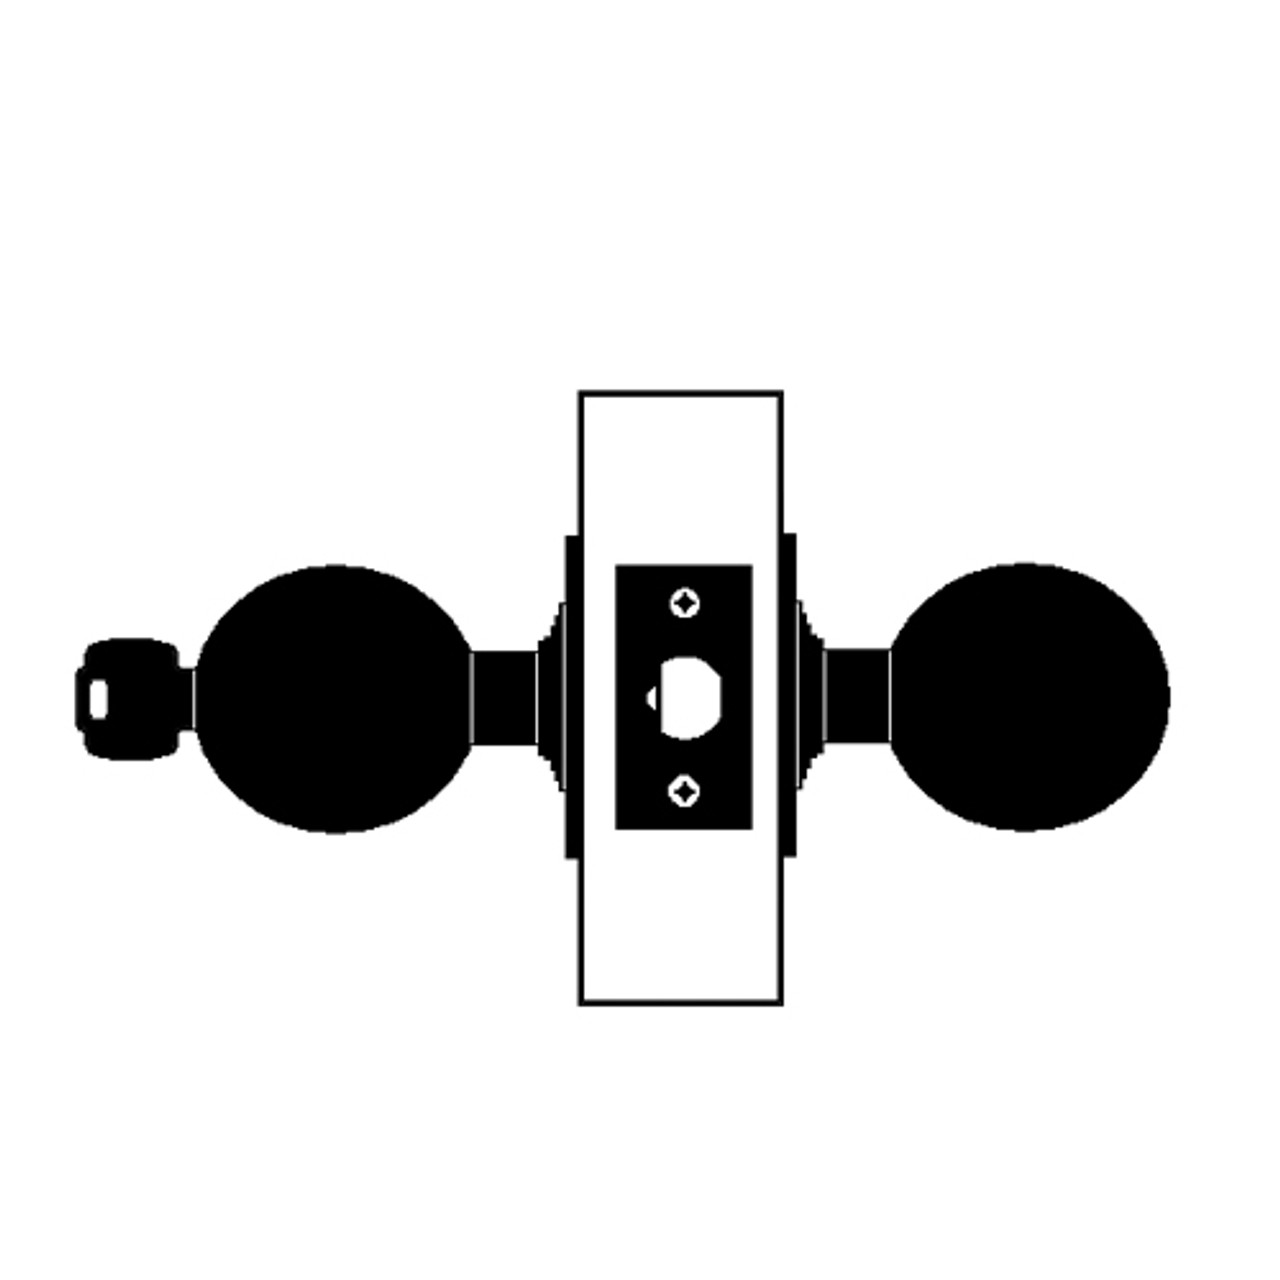 X581PD-HY-625 Falcon X Series Cylindrical Storeroom Lock with Hana-York Knob Style in Bright Chrome